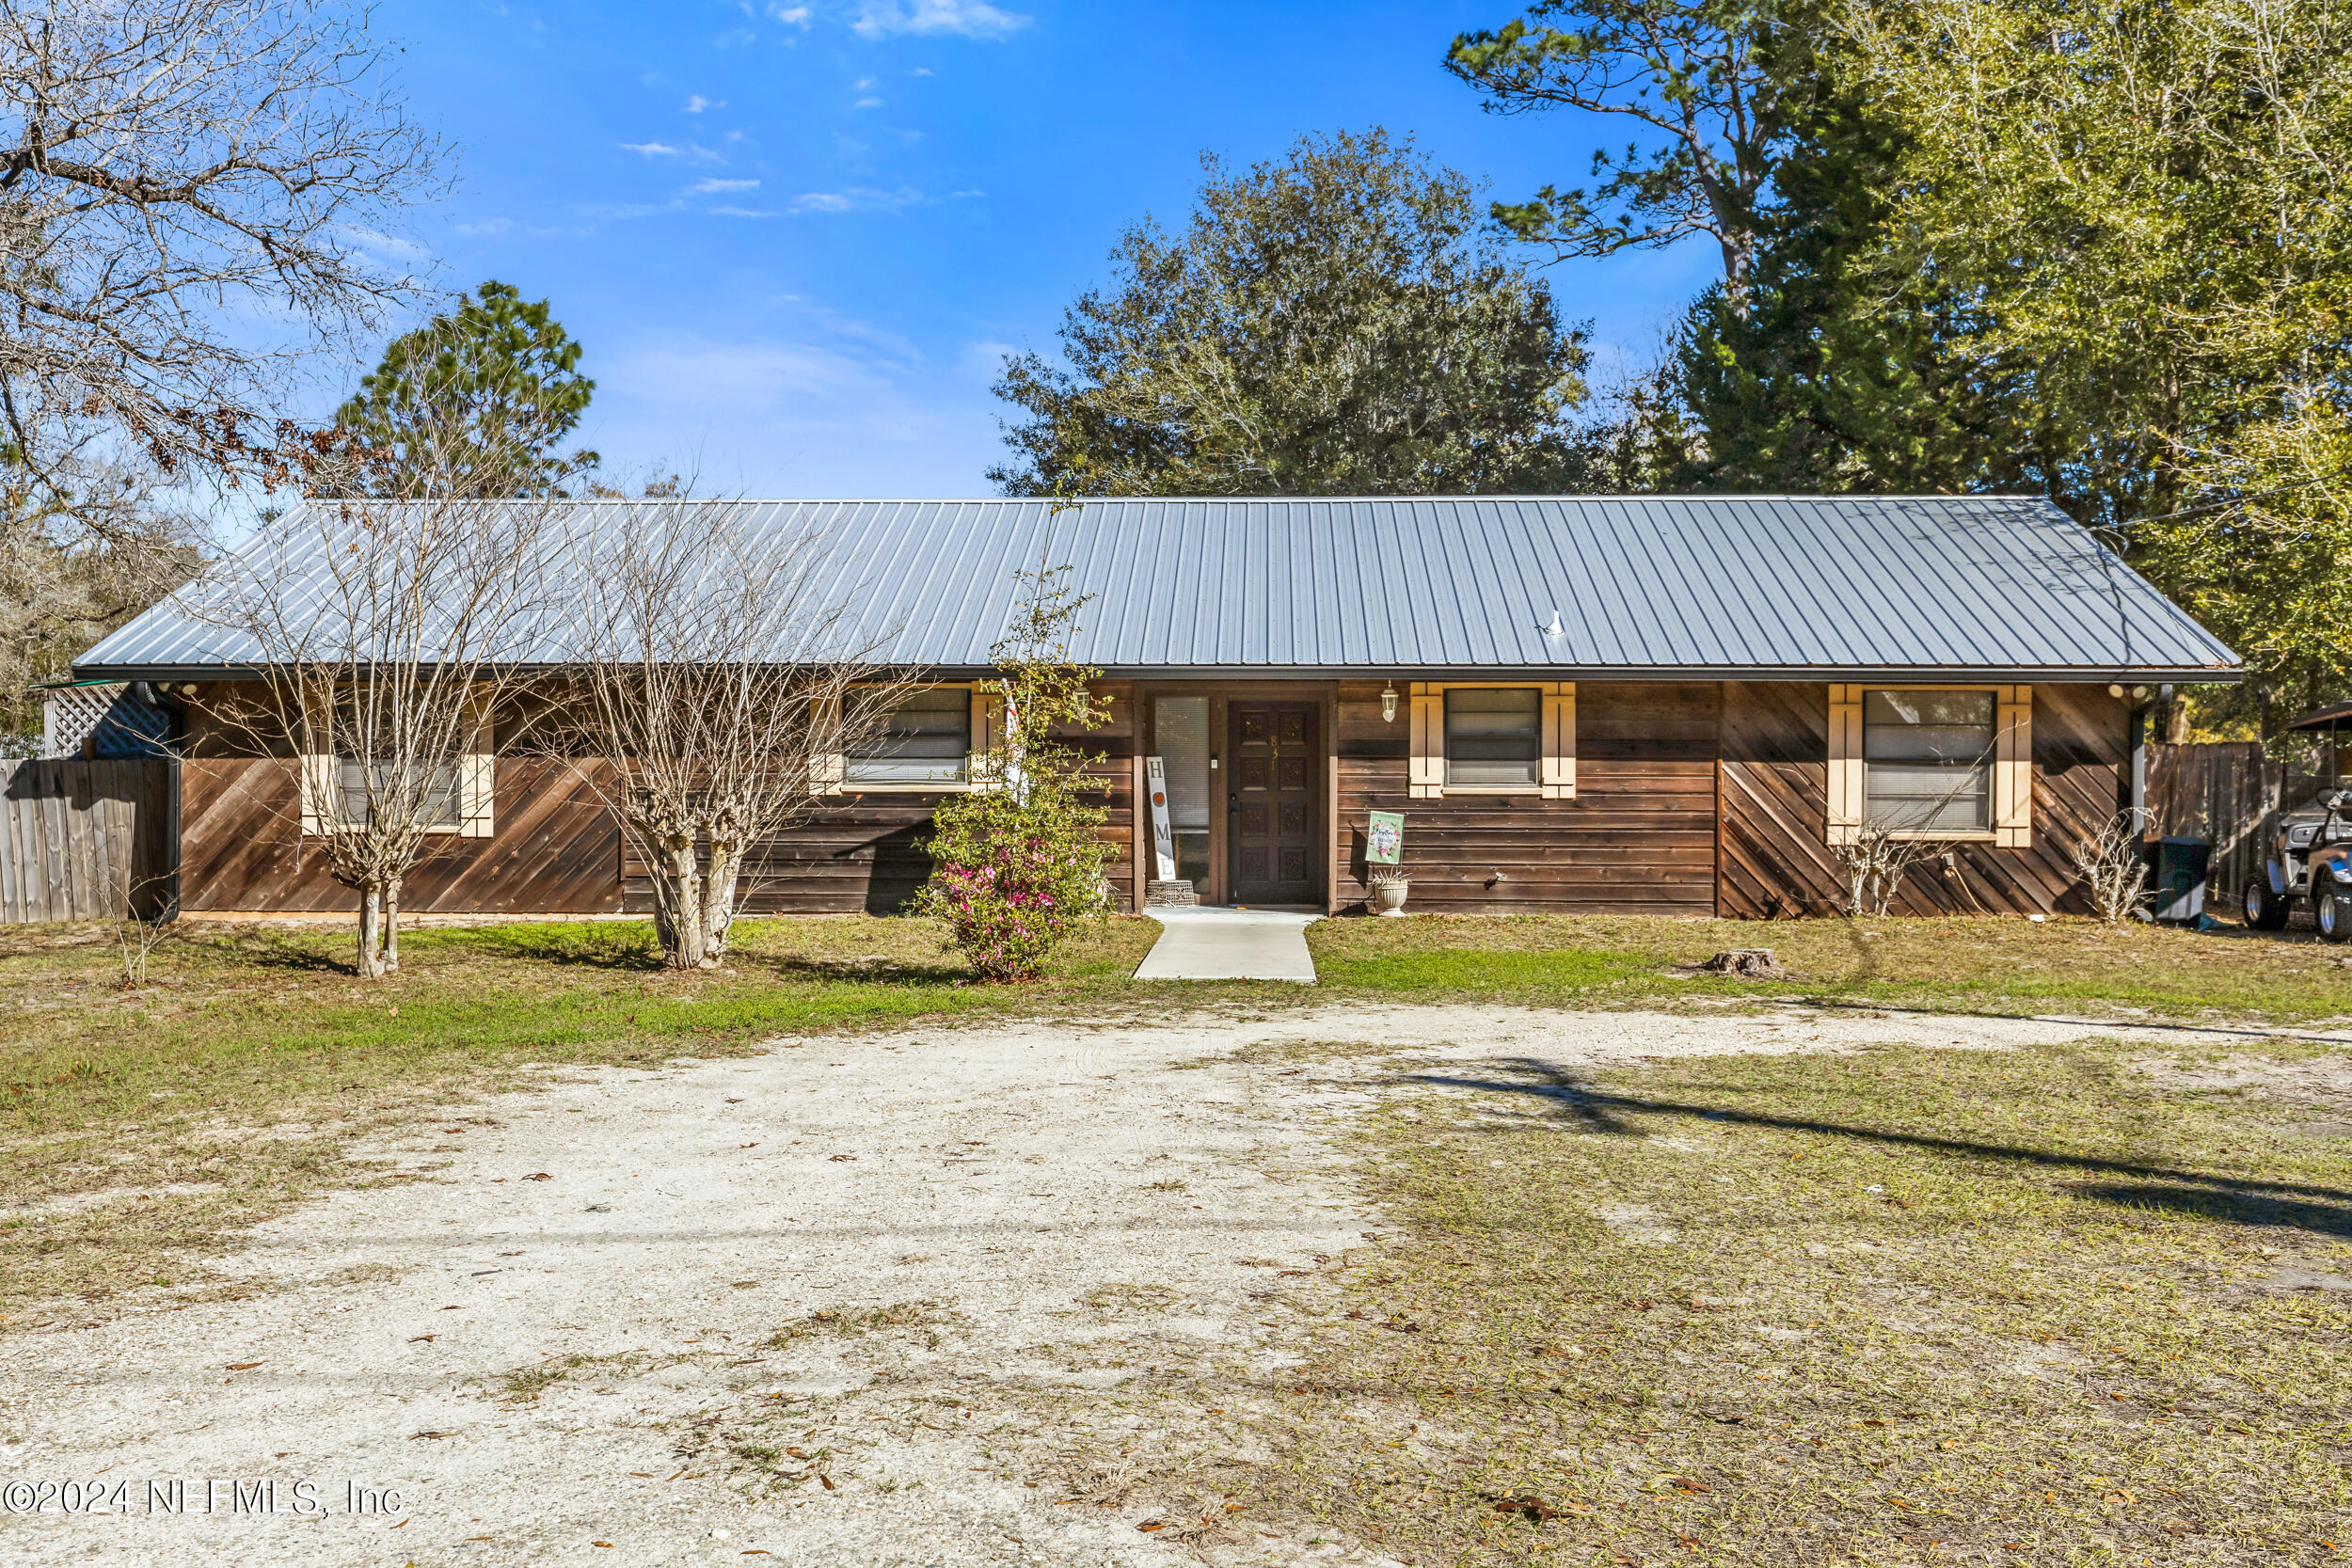 Keystone Heights, FL home for sale located at 831 SE 50TH Street, Keystone Heights, FL 32656